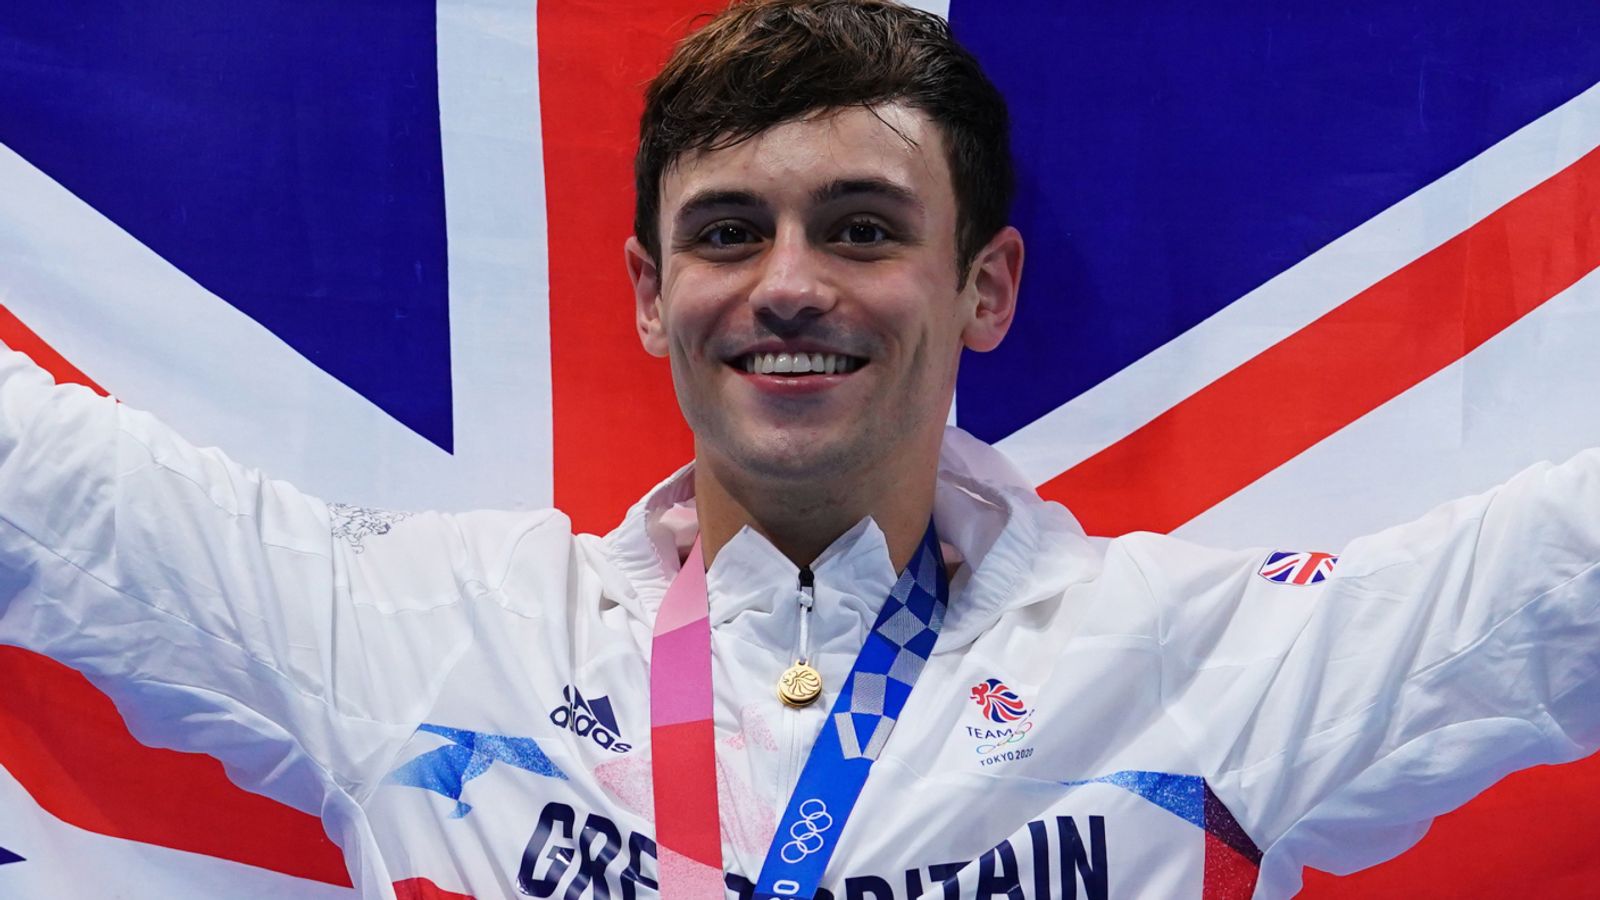 Tom Daley criticises FINA decision to restrict participation of transgender athletes